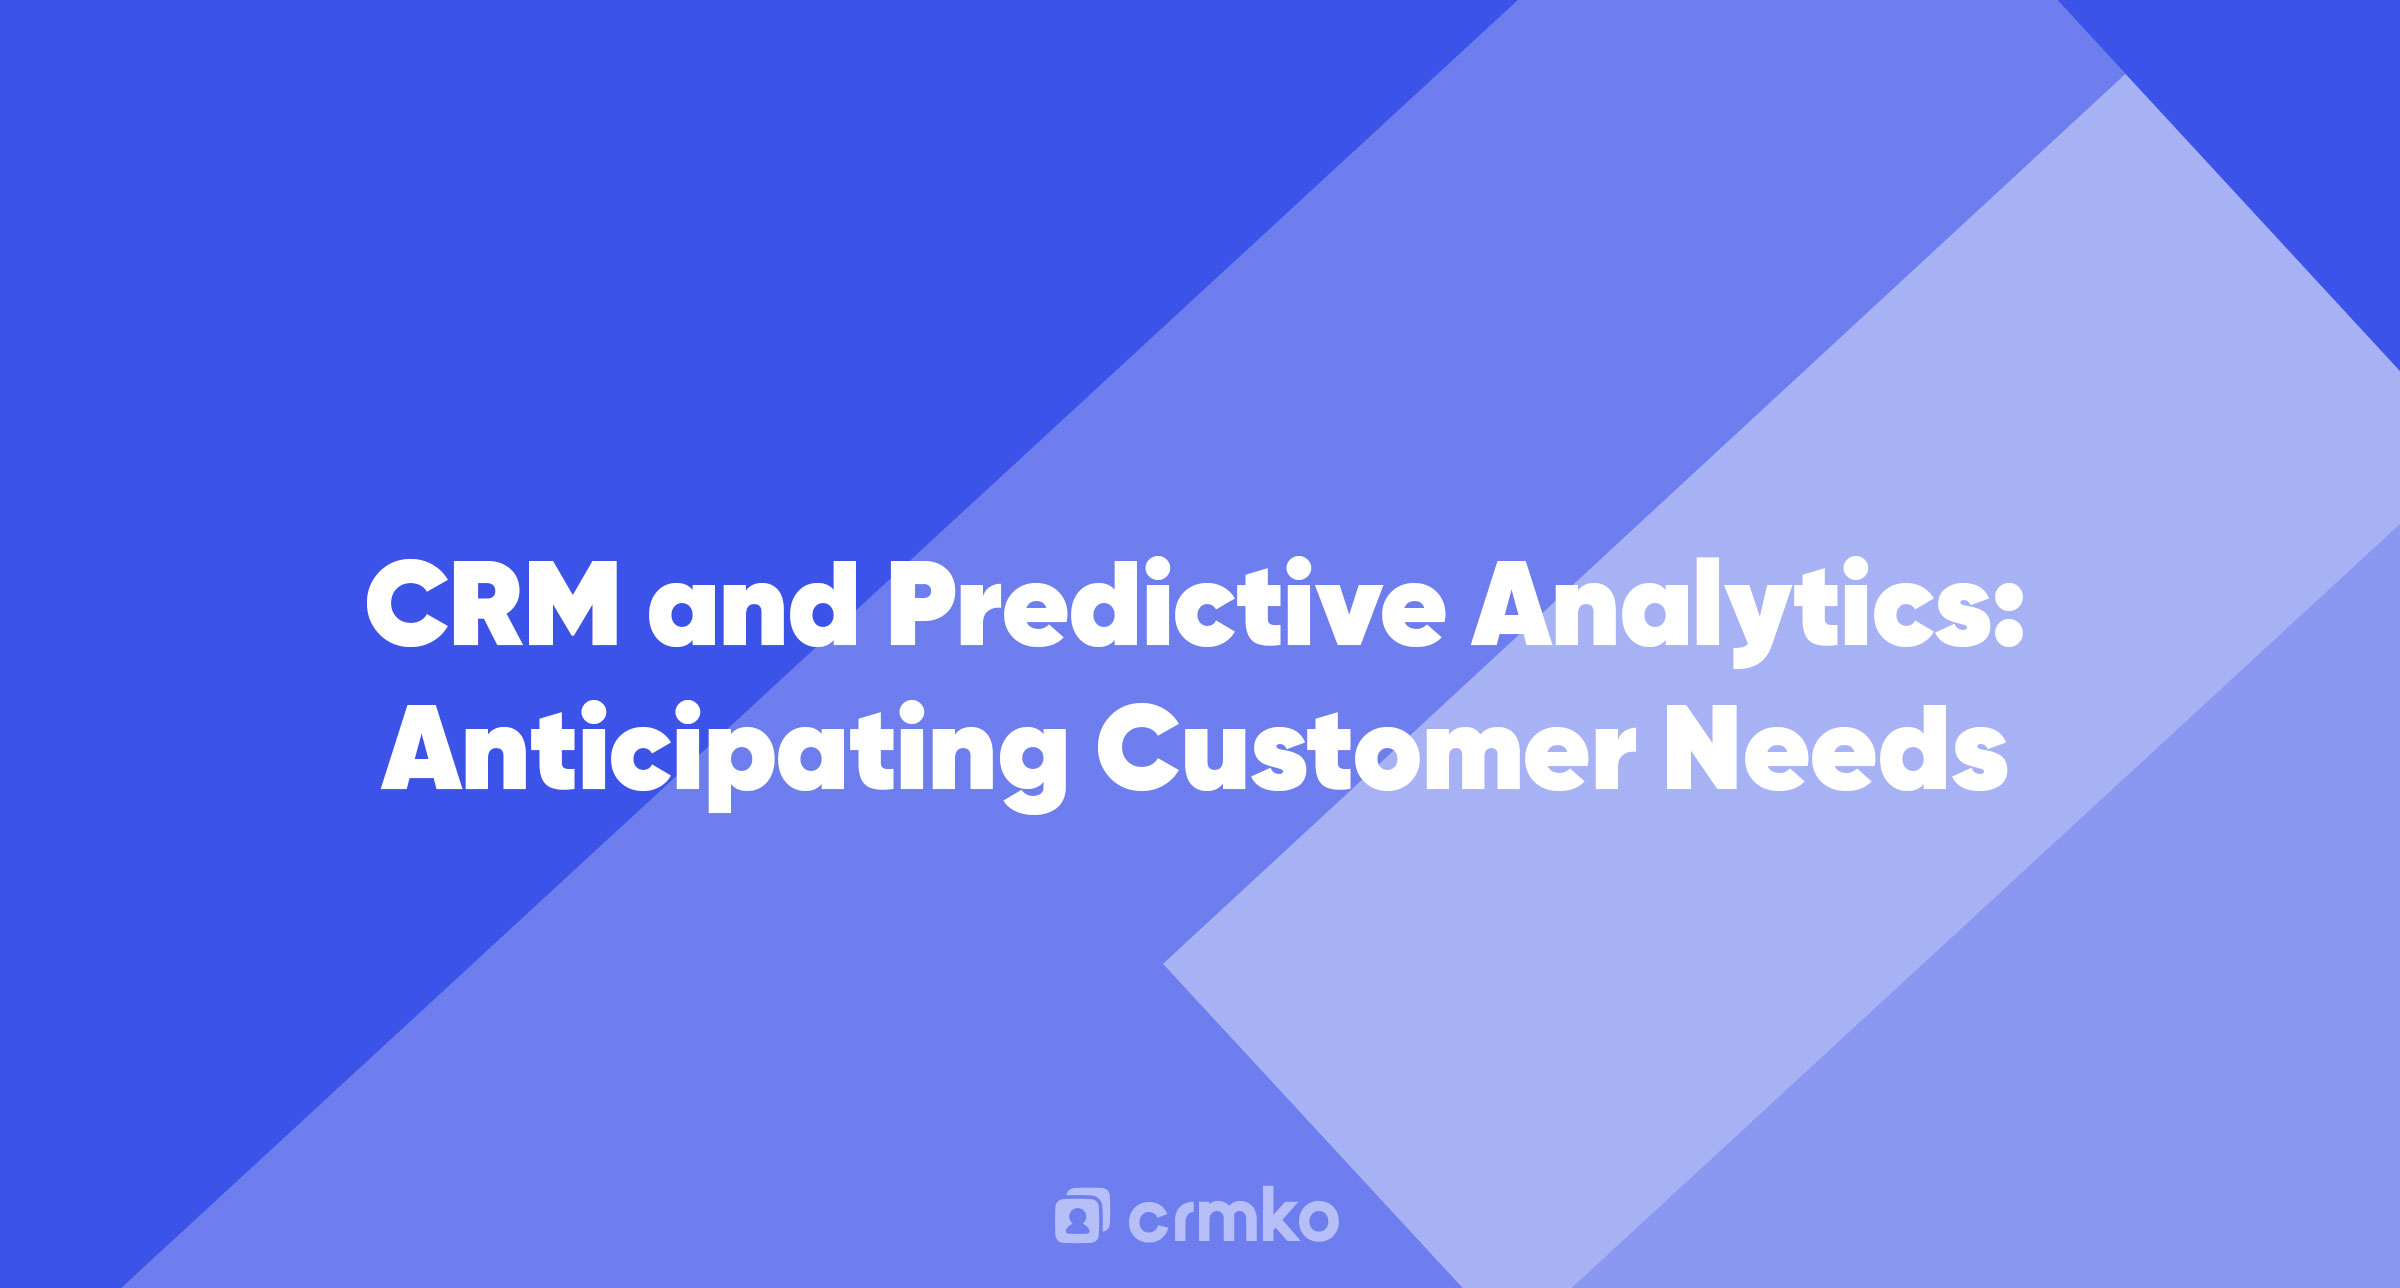 Article | CRM and Predictive Analytics: Anticipating Customer Needs